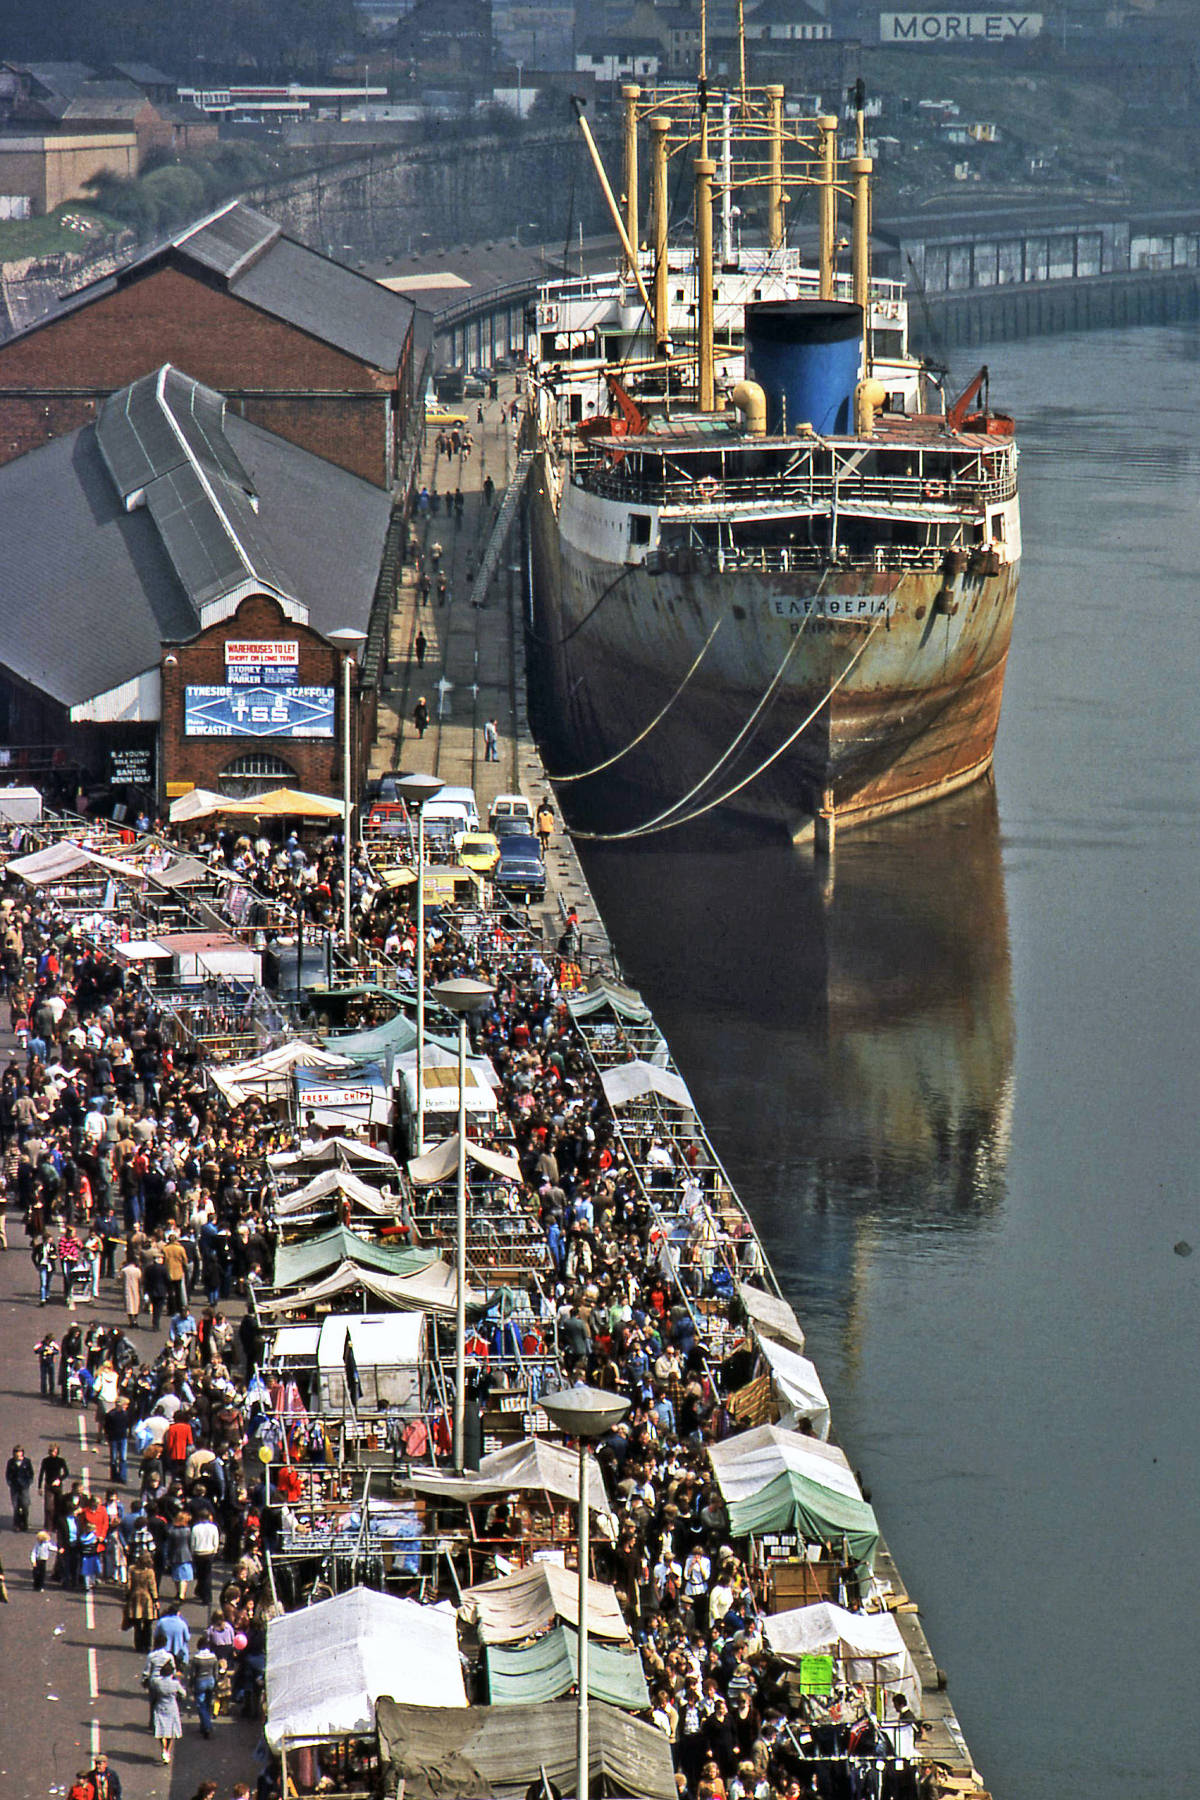 Sunday market on the Quayside in 1978